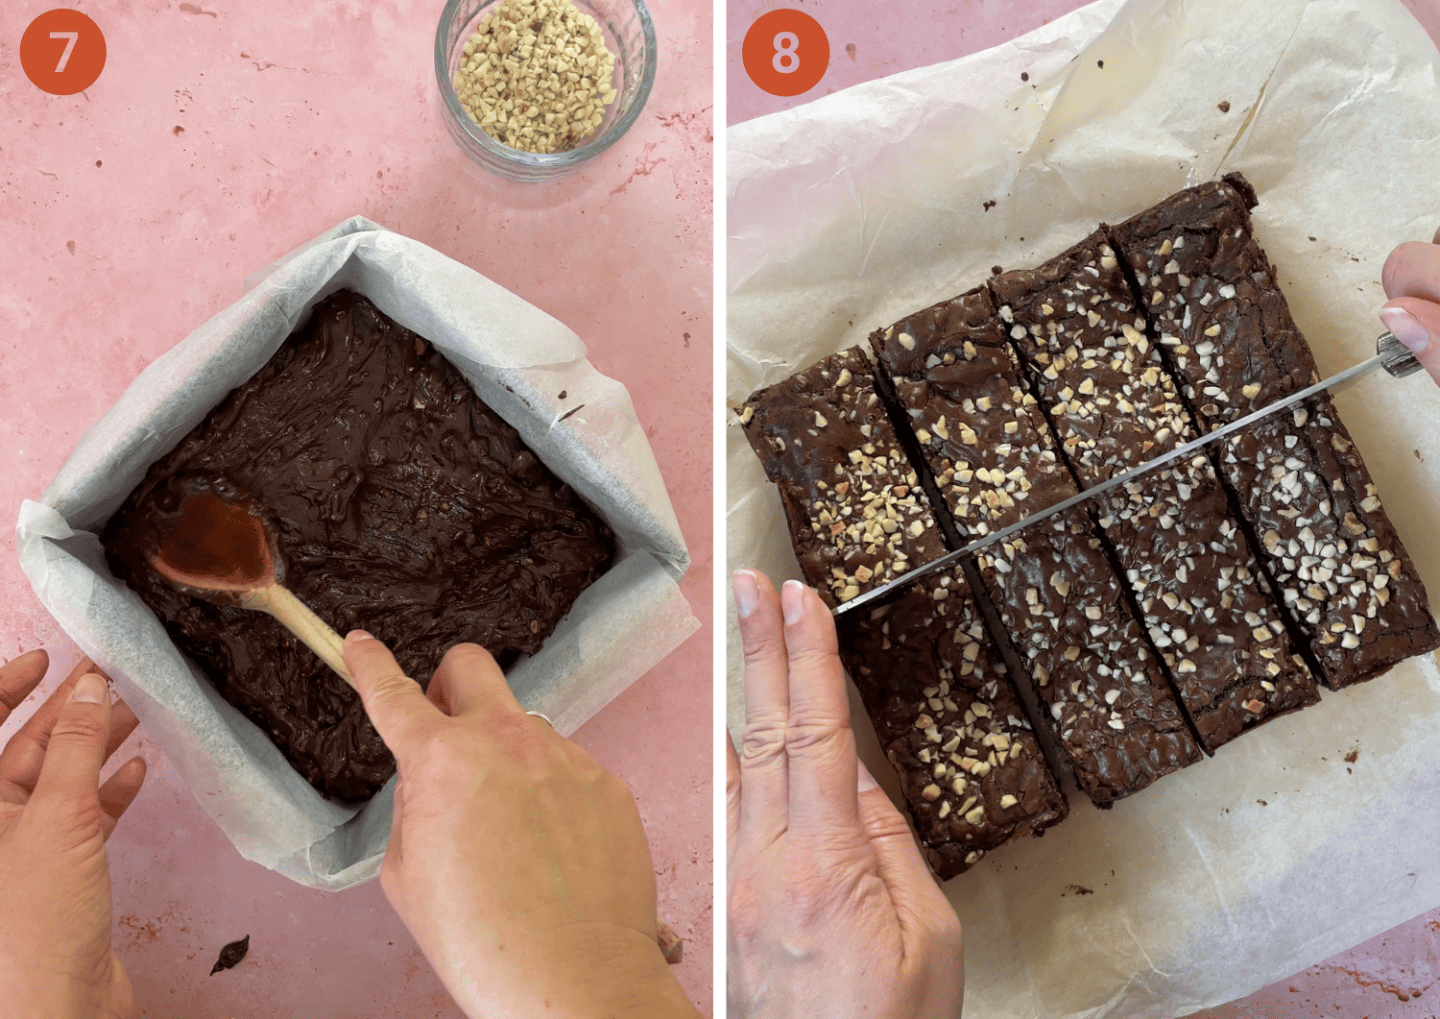 The gluten free brownies before and after baking.